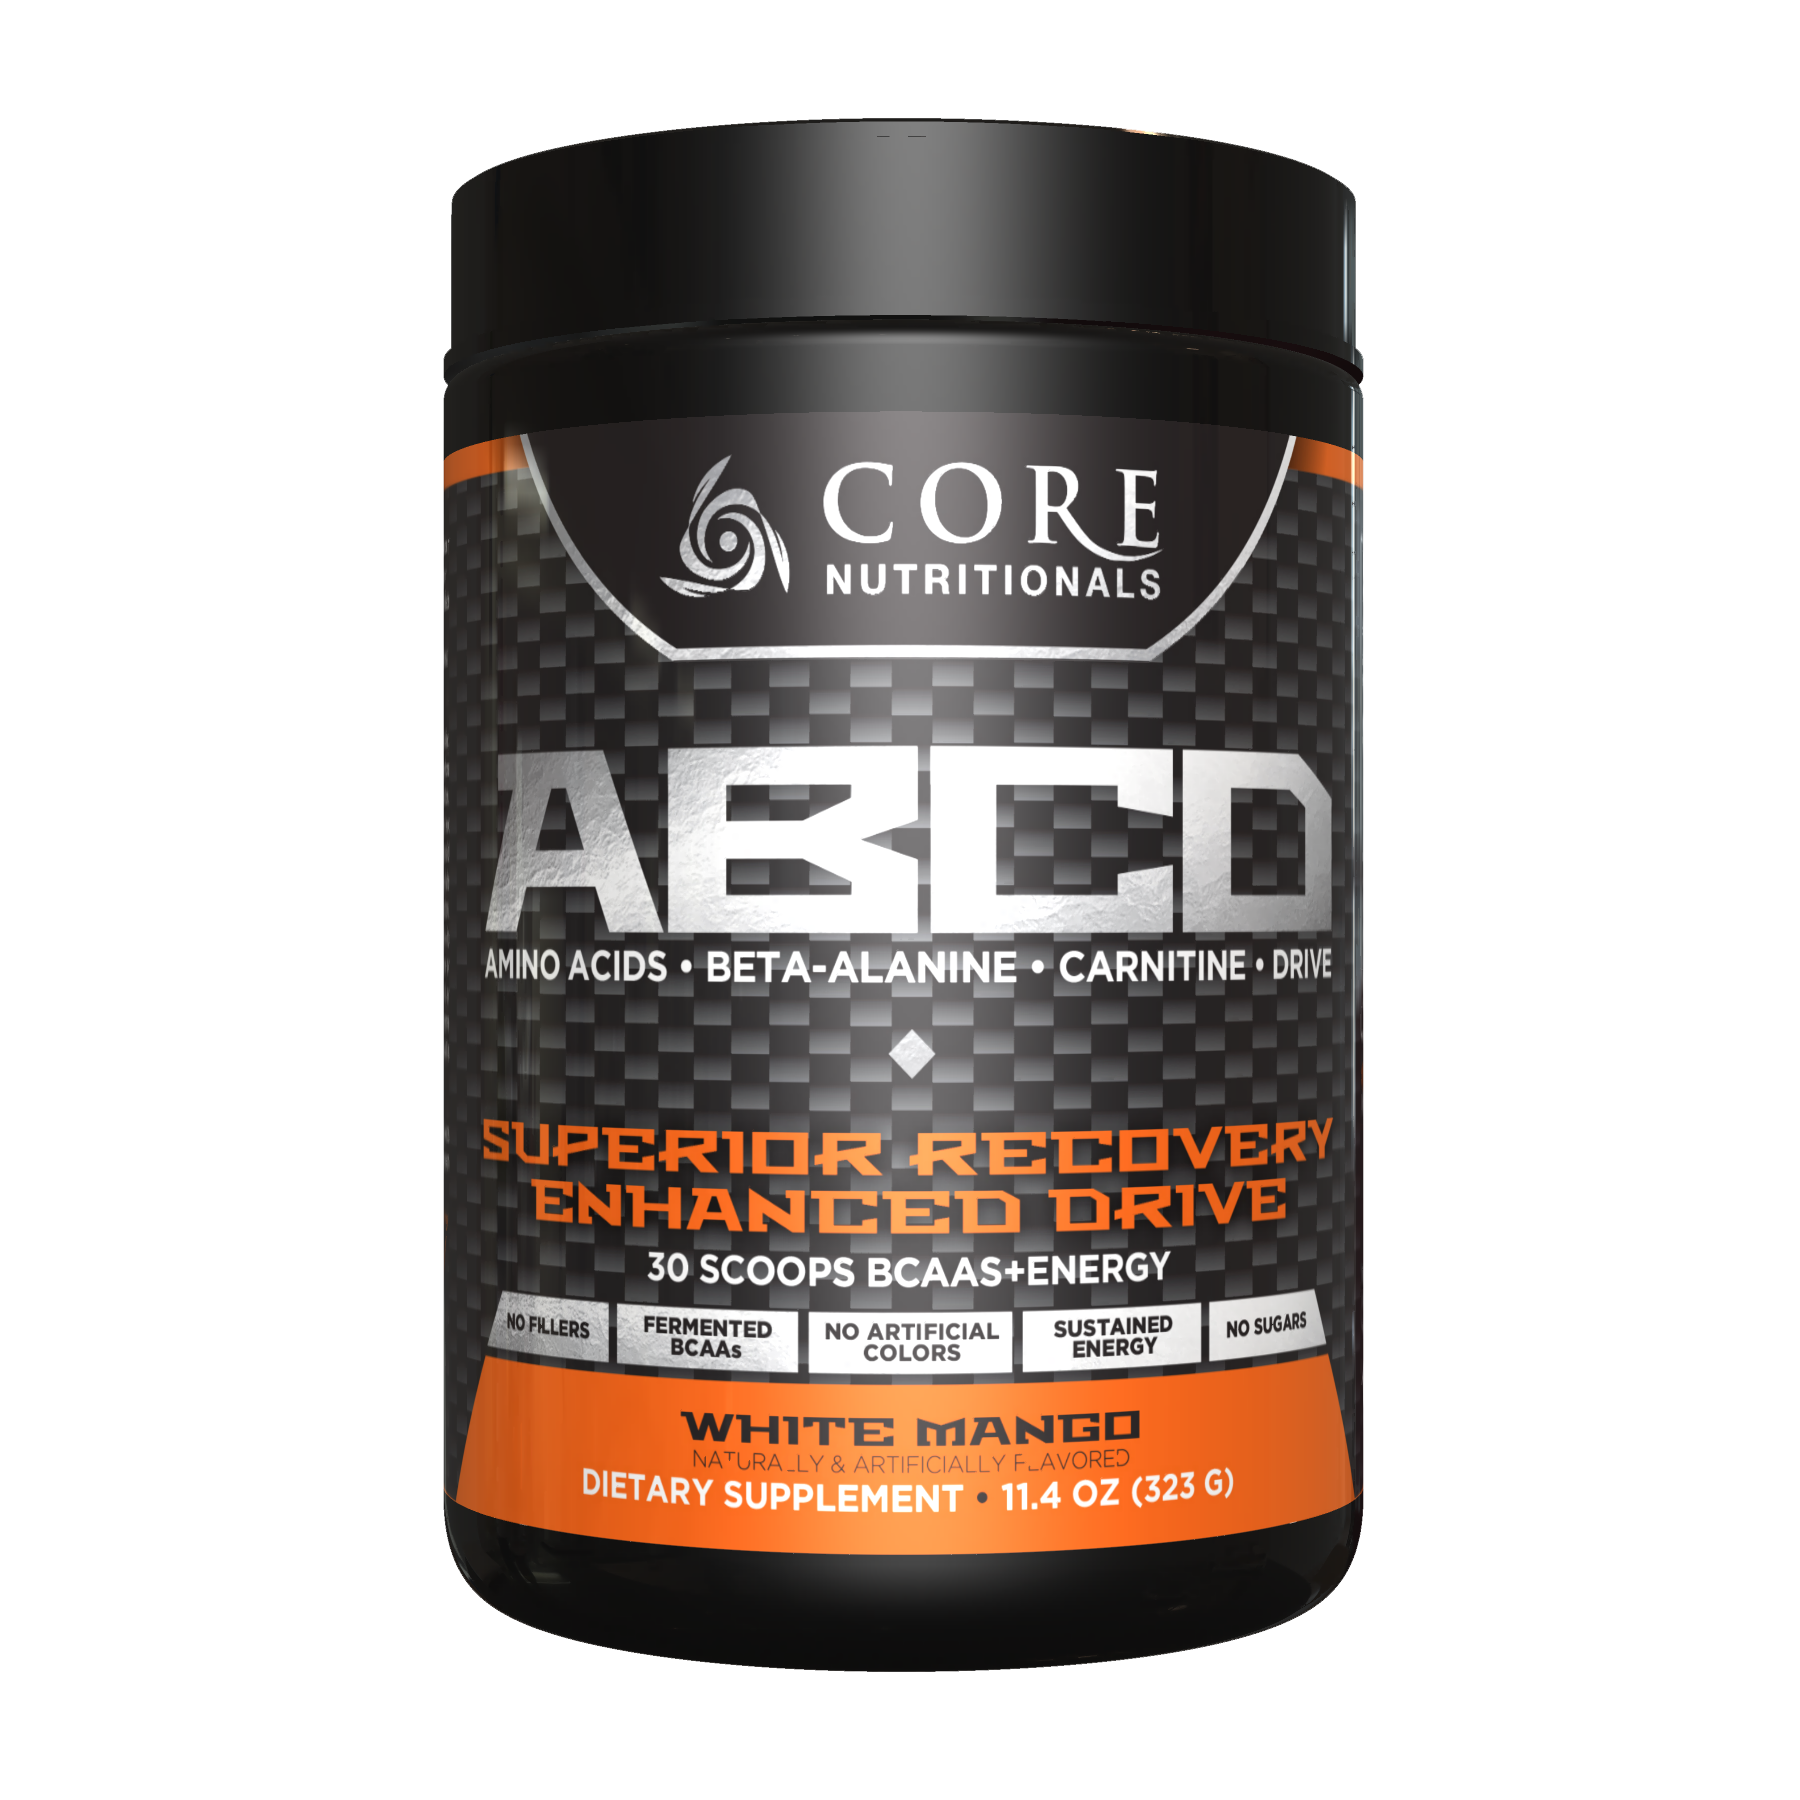 Core Nutritionals ABCD White mango